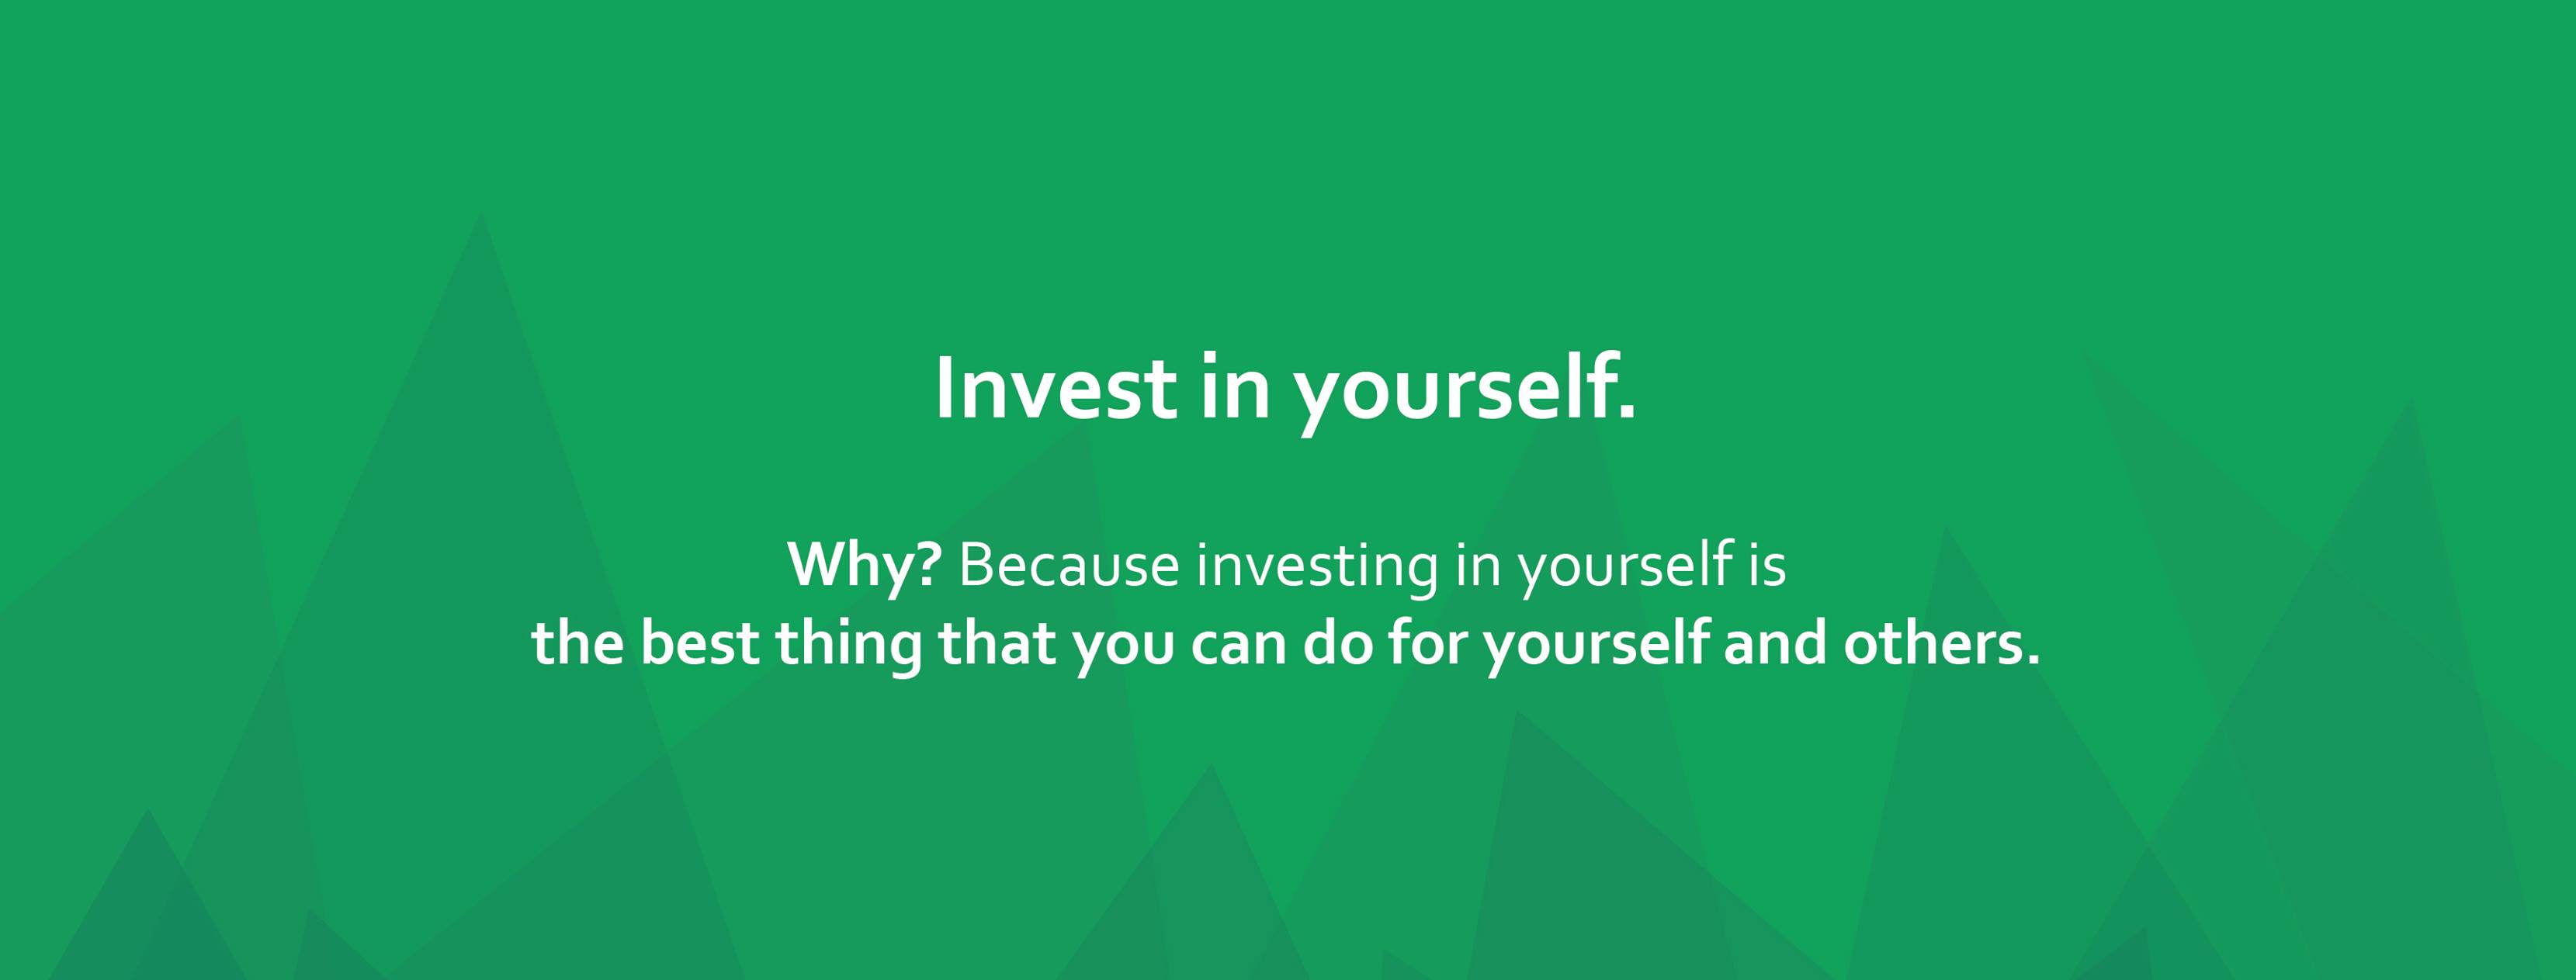 cytat: Invest in yourself